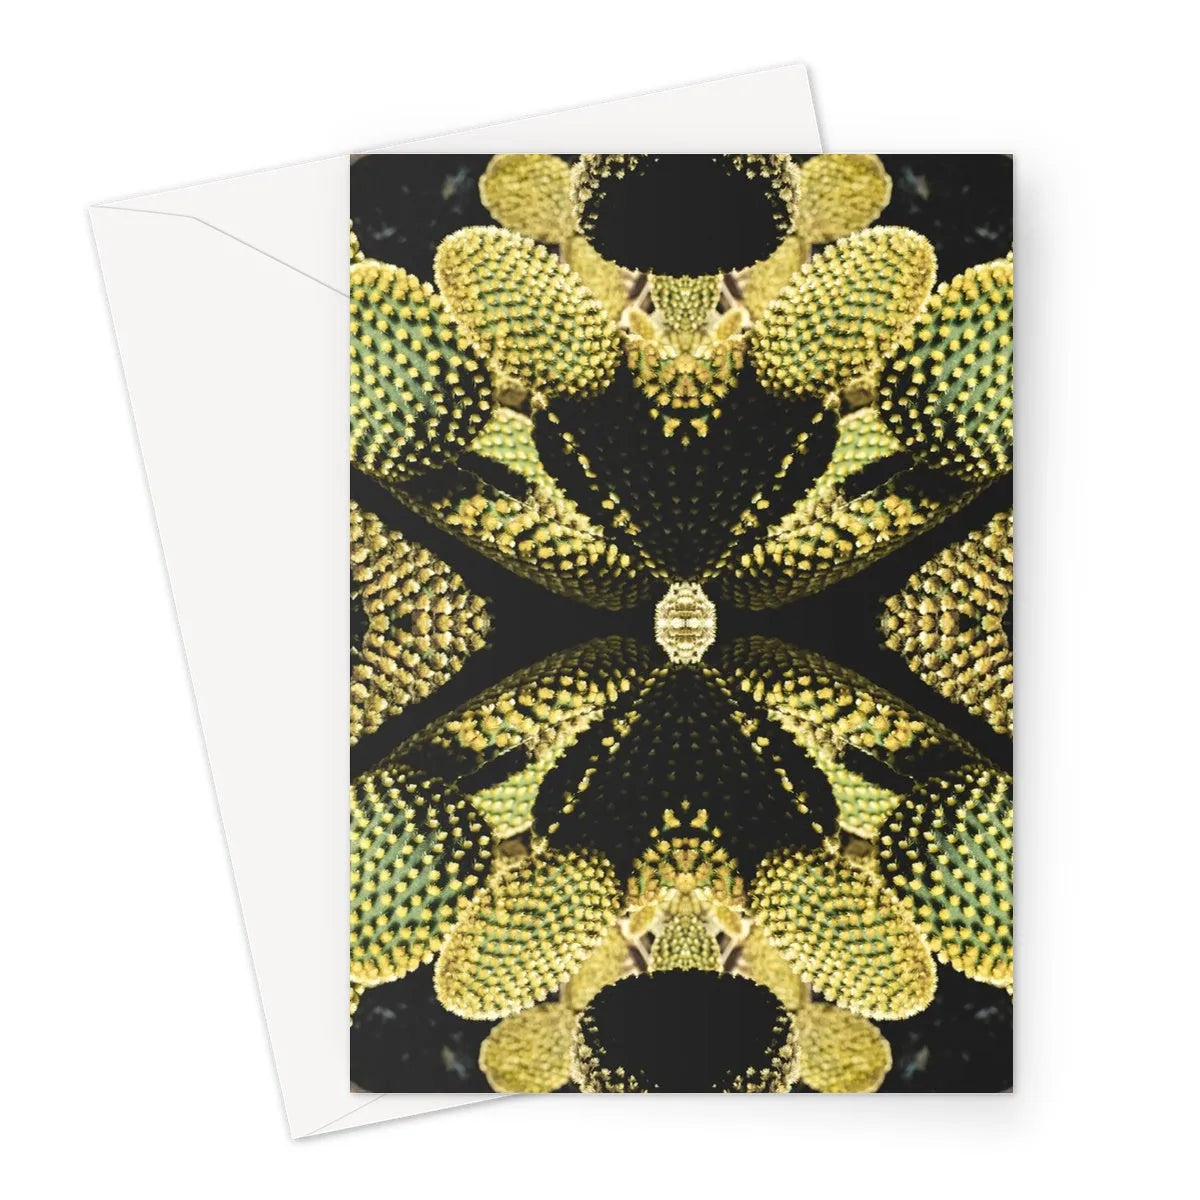 Life On Mars - Trippy Botanical Succulent Art Greeting Card - A5 Portrait / 1 Card - Greeting & Note Cards - Aesthetic